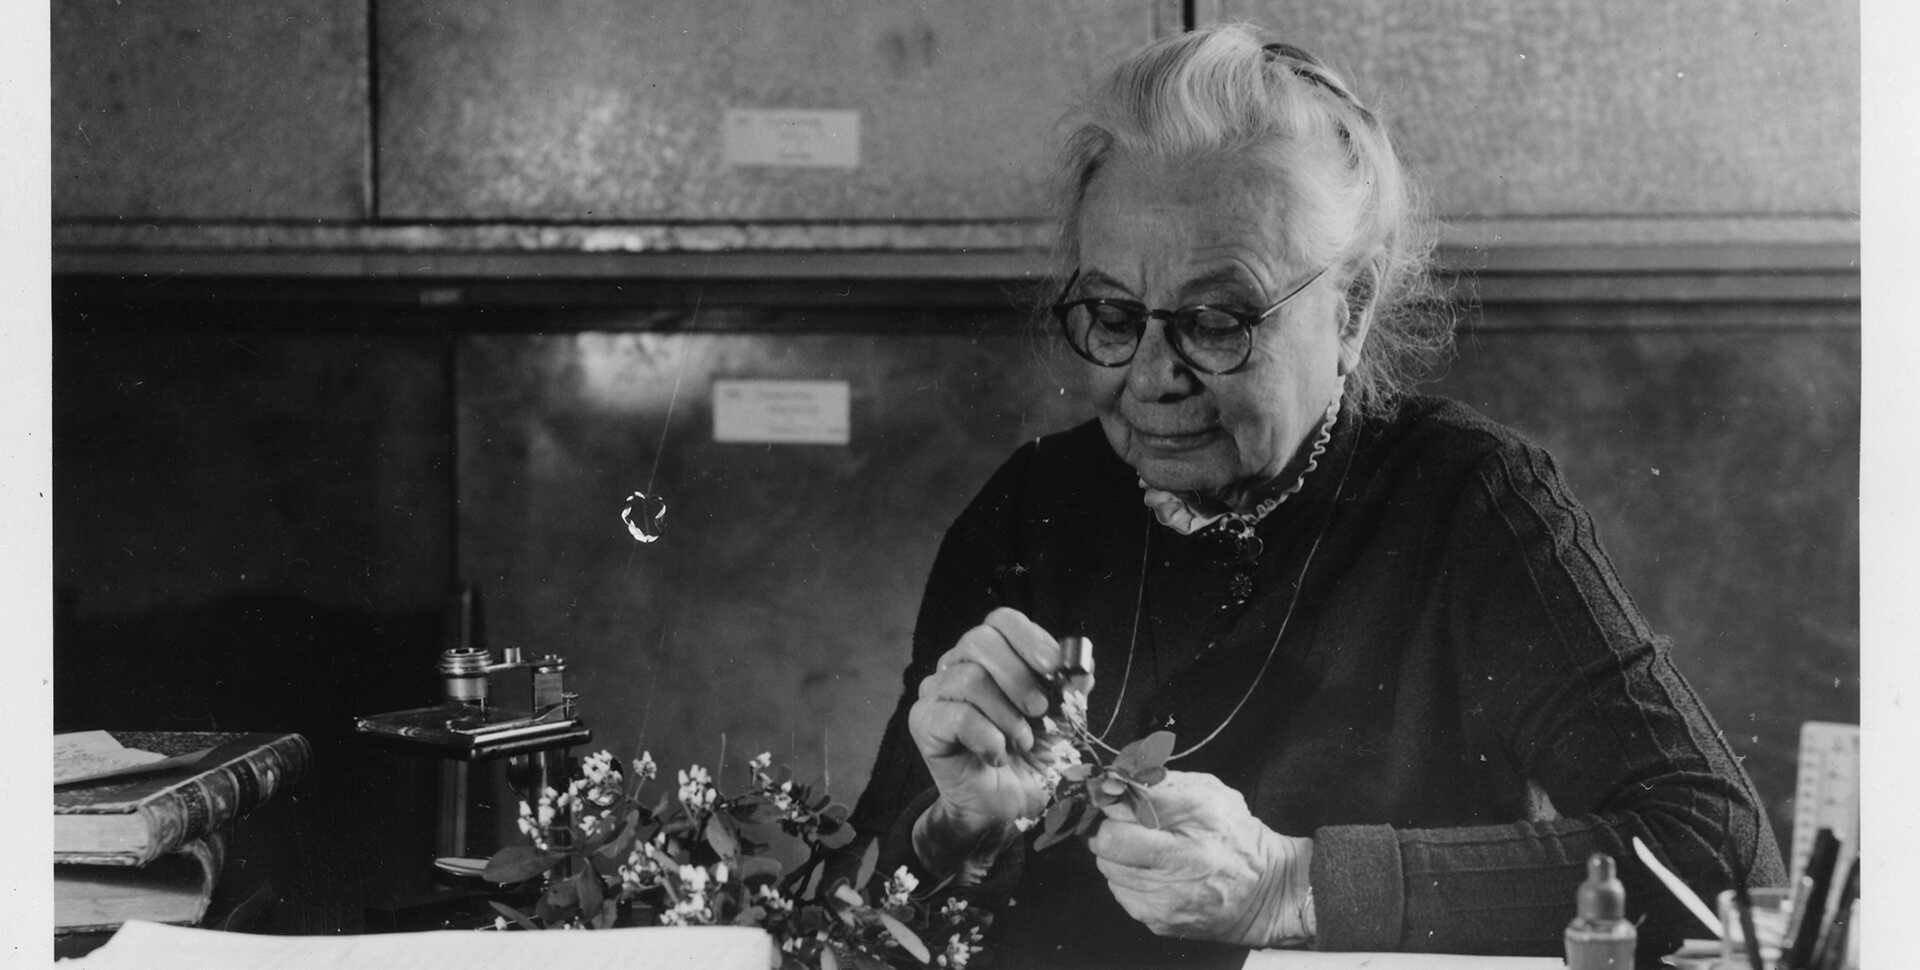 Alice Eastwood inspects a plant stem using a pocket magnifier necklace, wearing a black dress in a black and white vintage image.